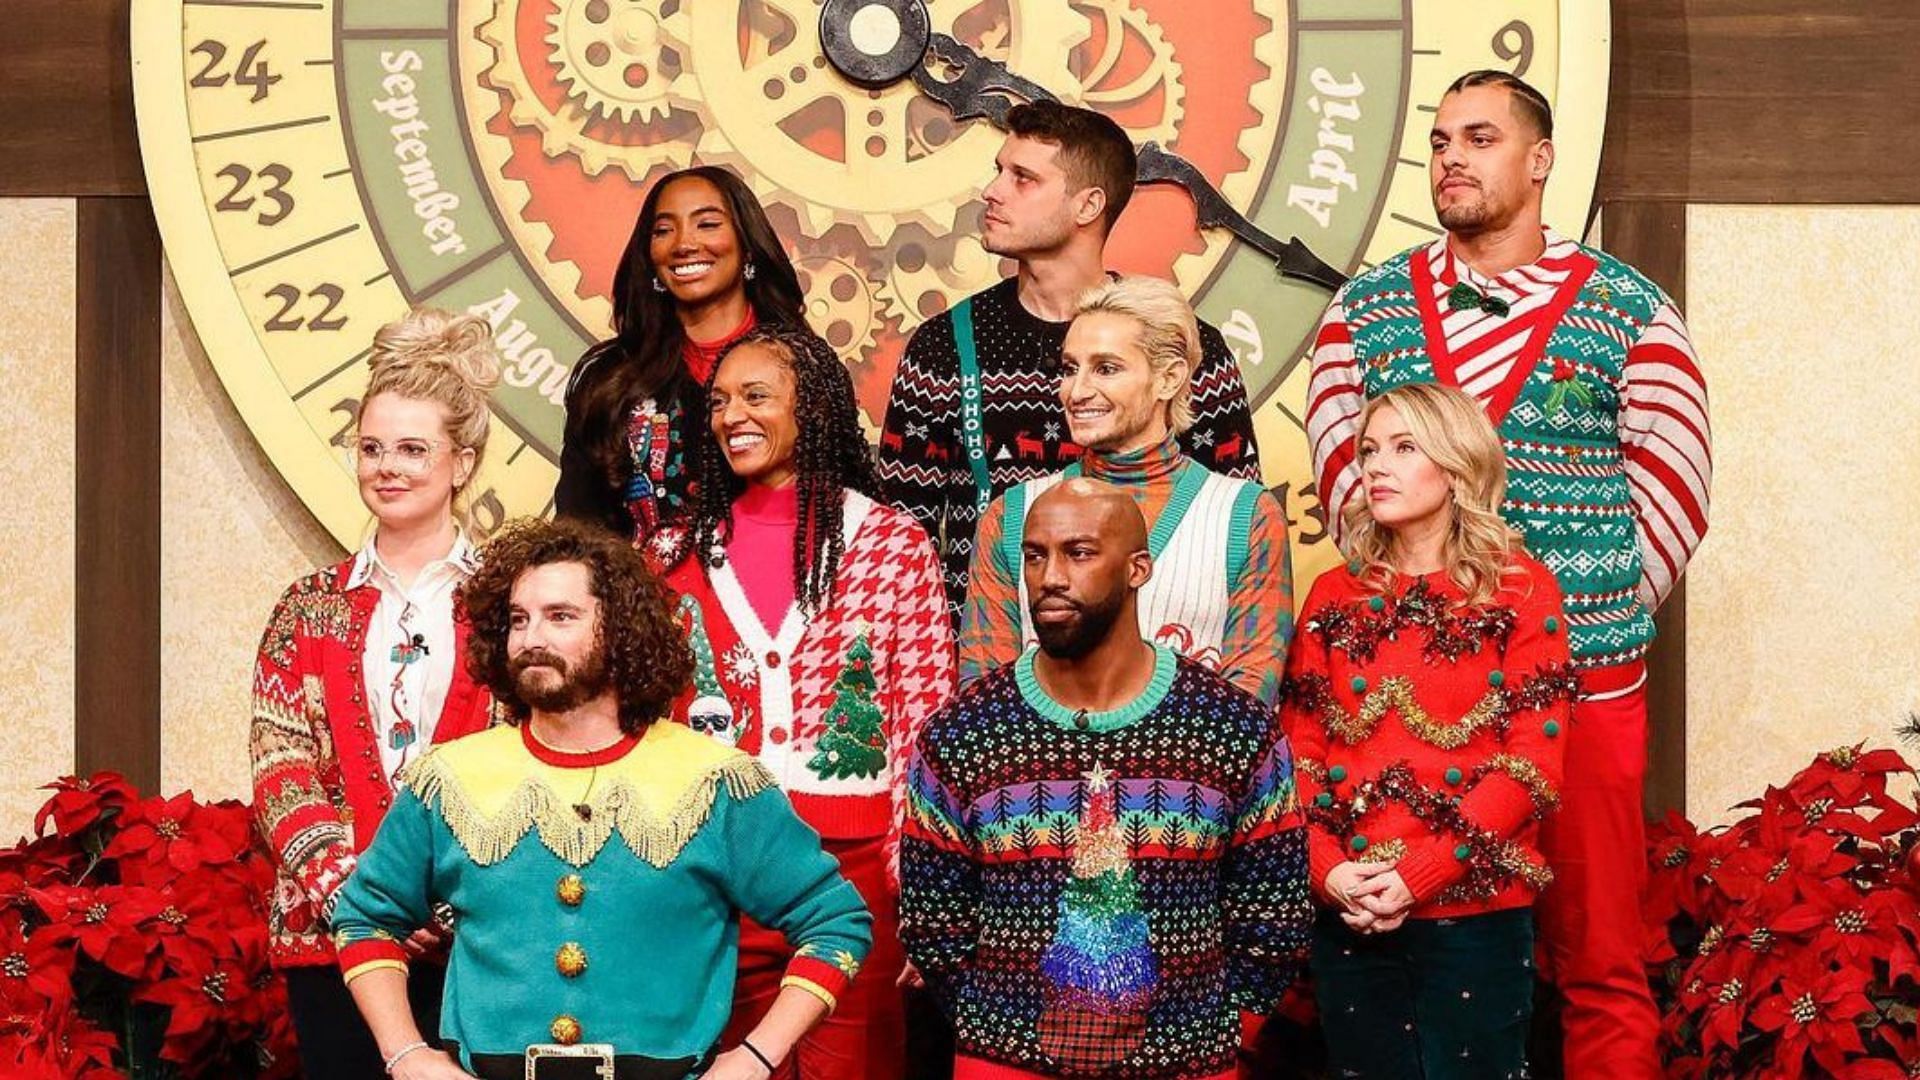 How many episodes of Big Brother Reindeer Games will be there? Full